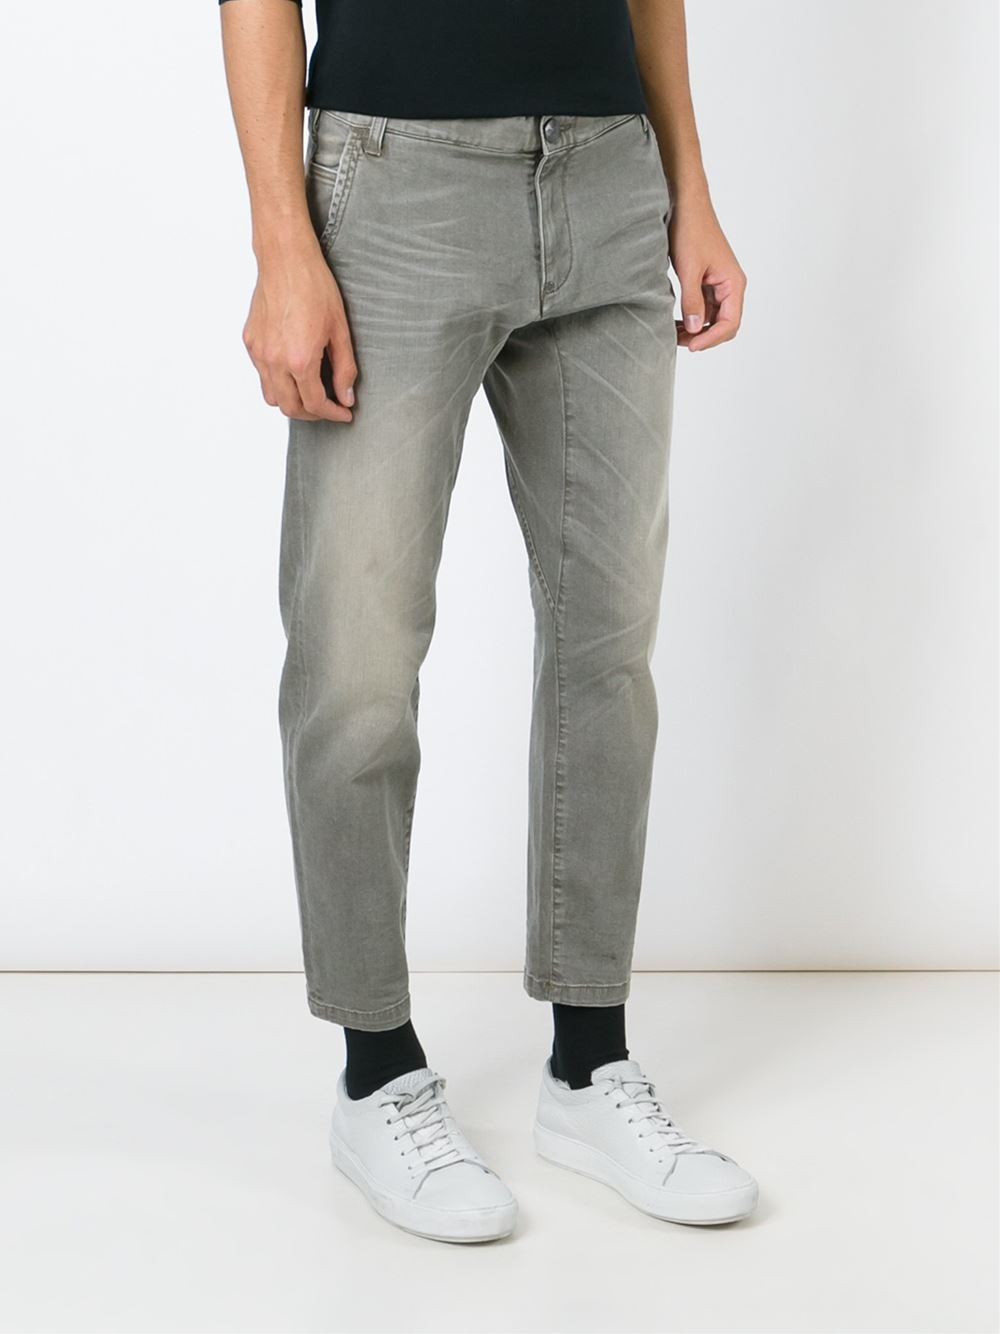 mens grey tapered jeans